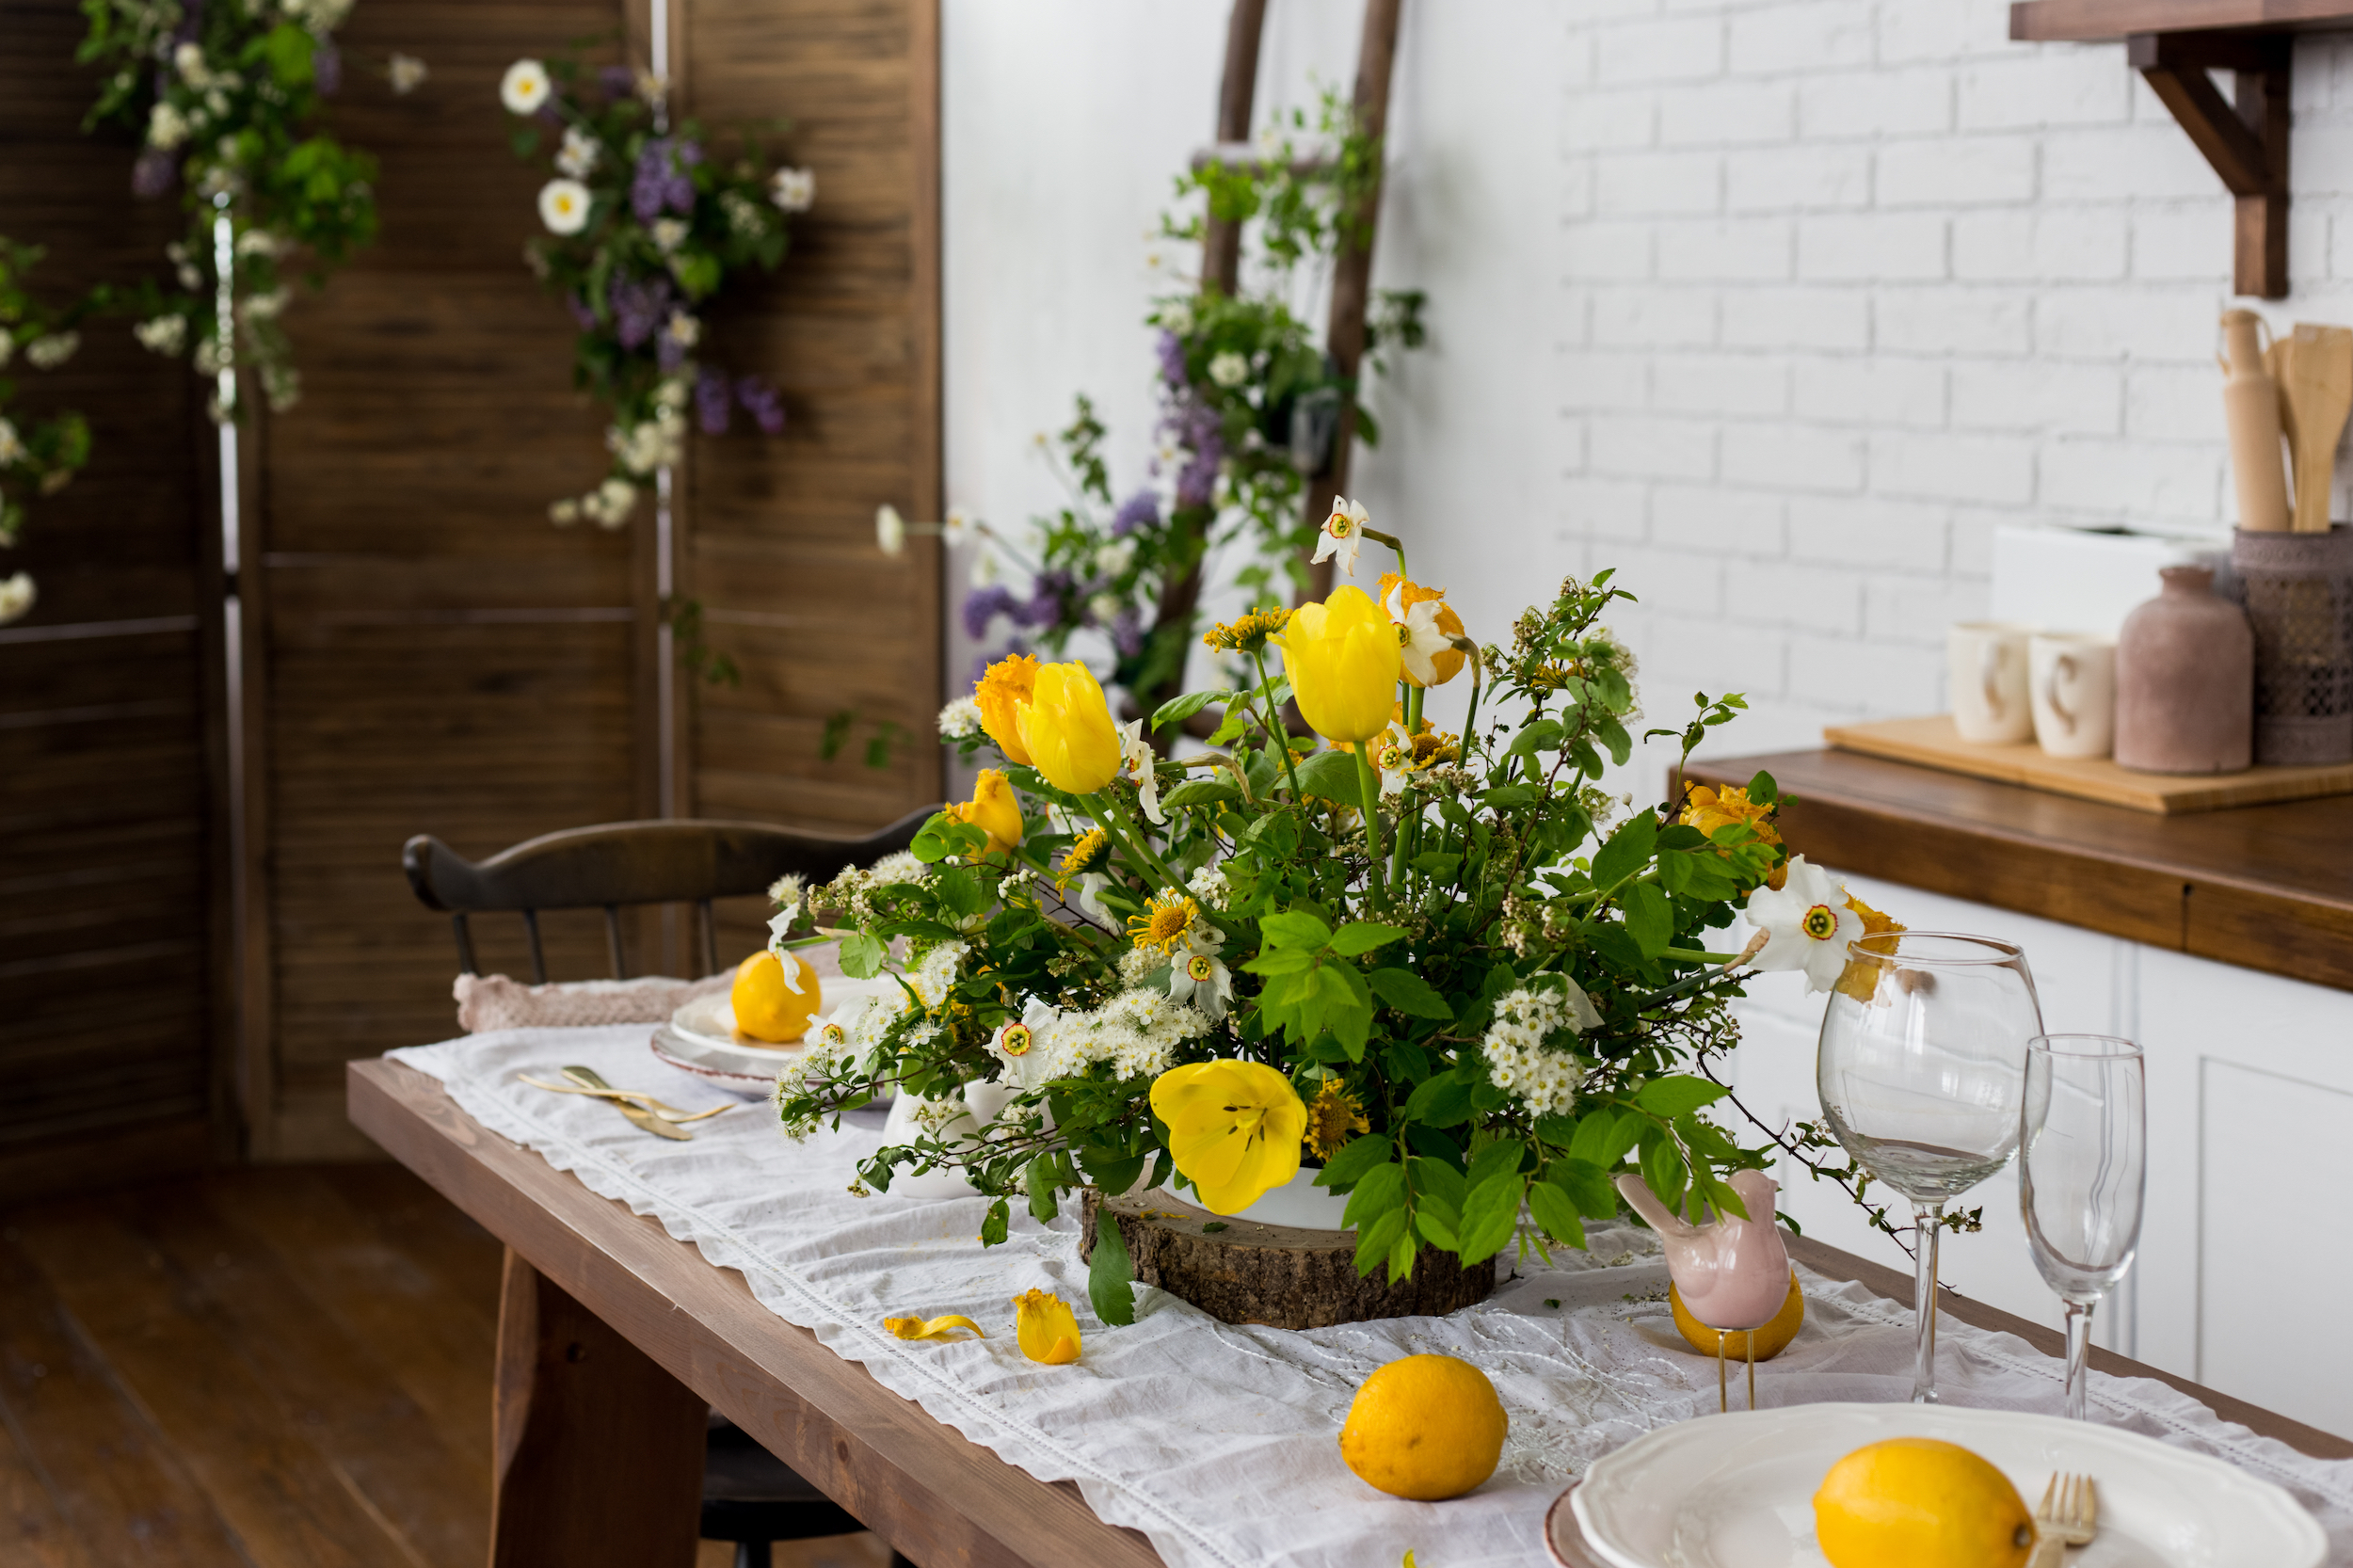 A bouquet of yellow tulips, white flowers with leaves decorates a served wooden table with a white tablecloth. On the table are lemons, plates, glasses. Stylish living room decor in Scandinavian style